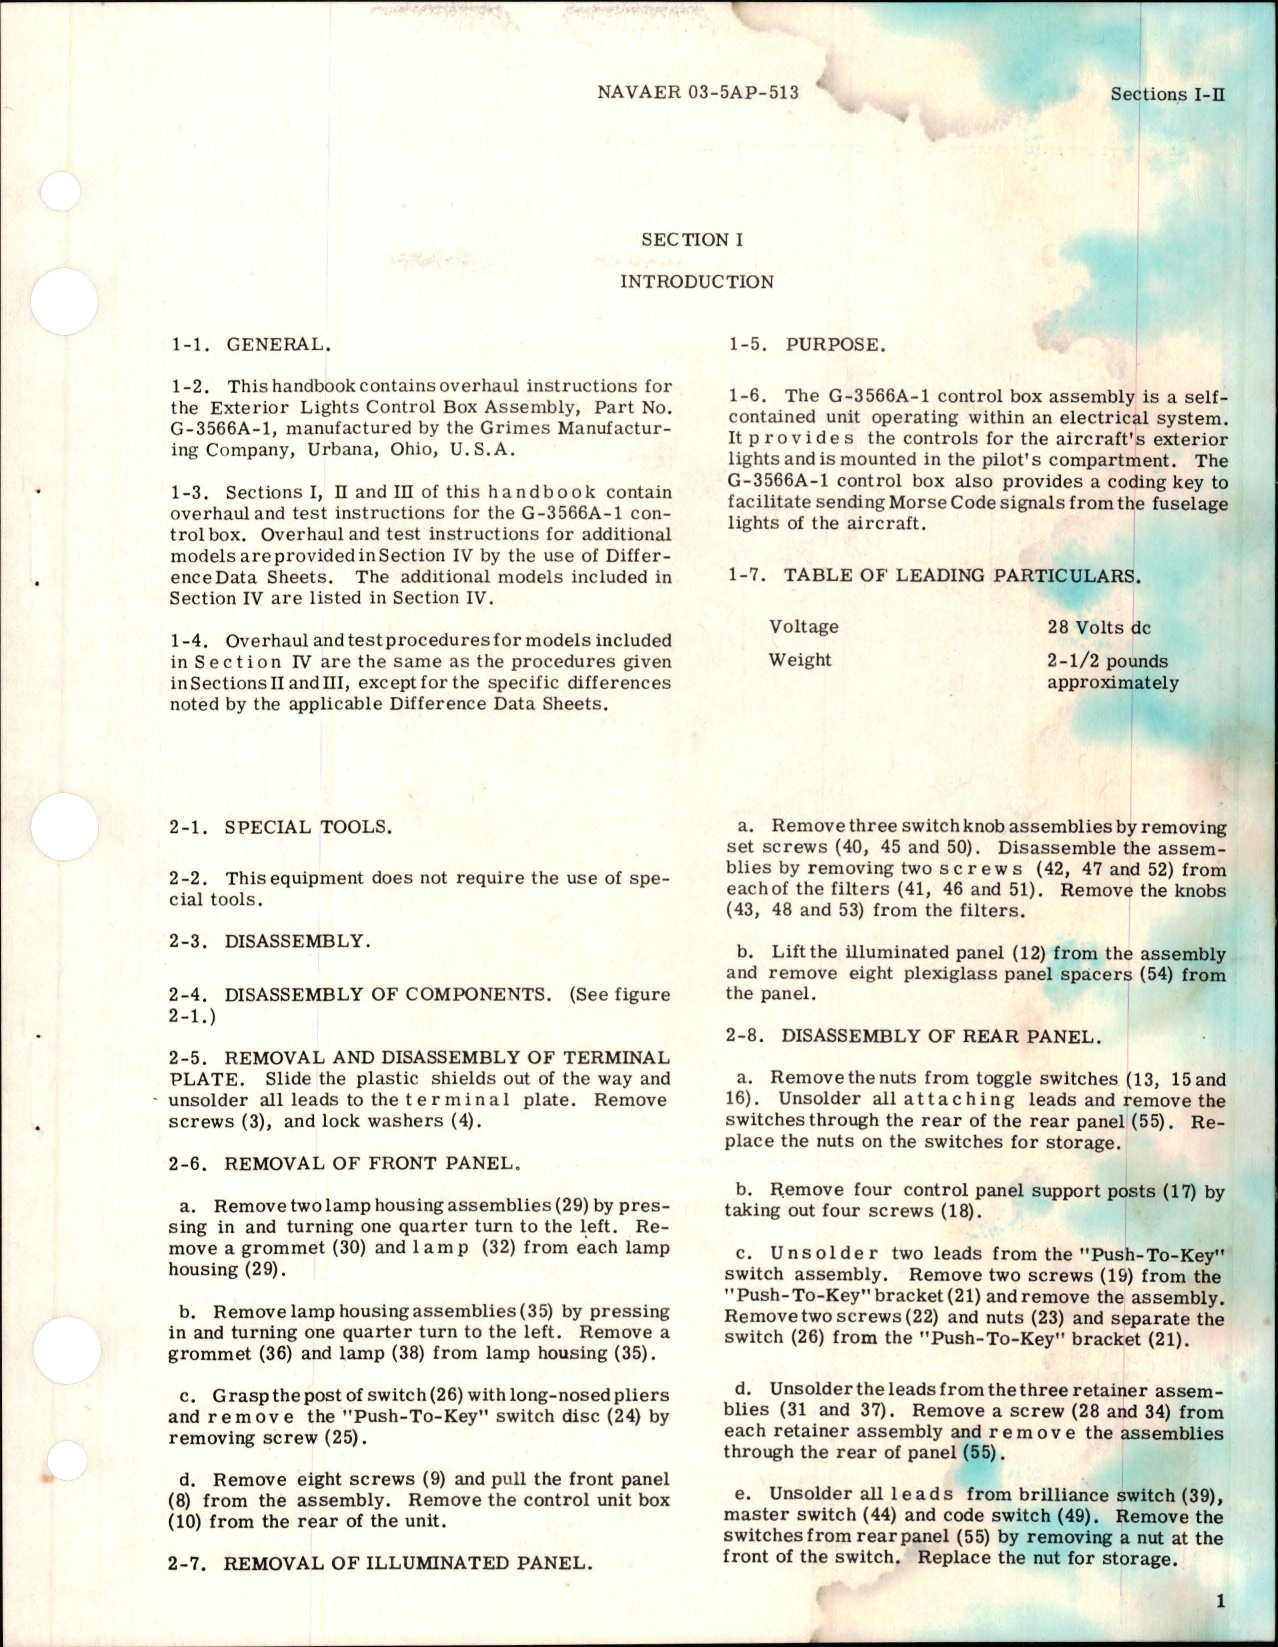 Sample page 5 from AirCorps Library document: Overhaul Instructions for Exterior Lights Control Box - Parts G-3566A-1 and G-3566A-2